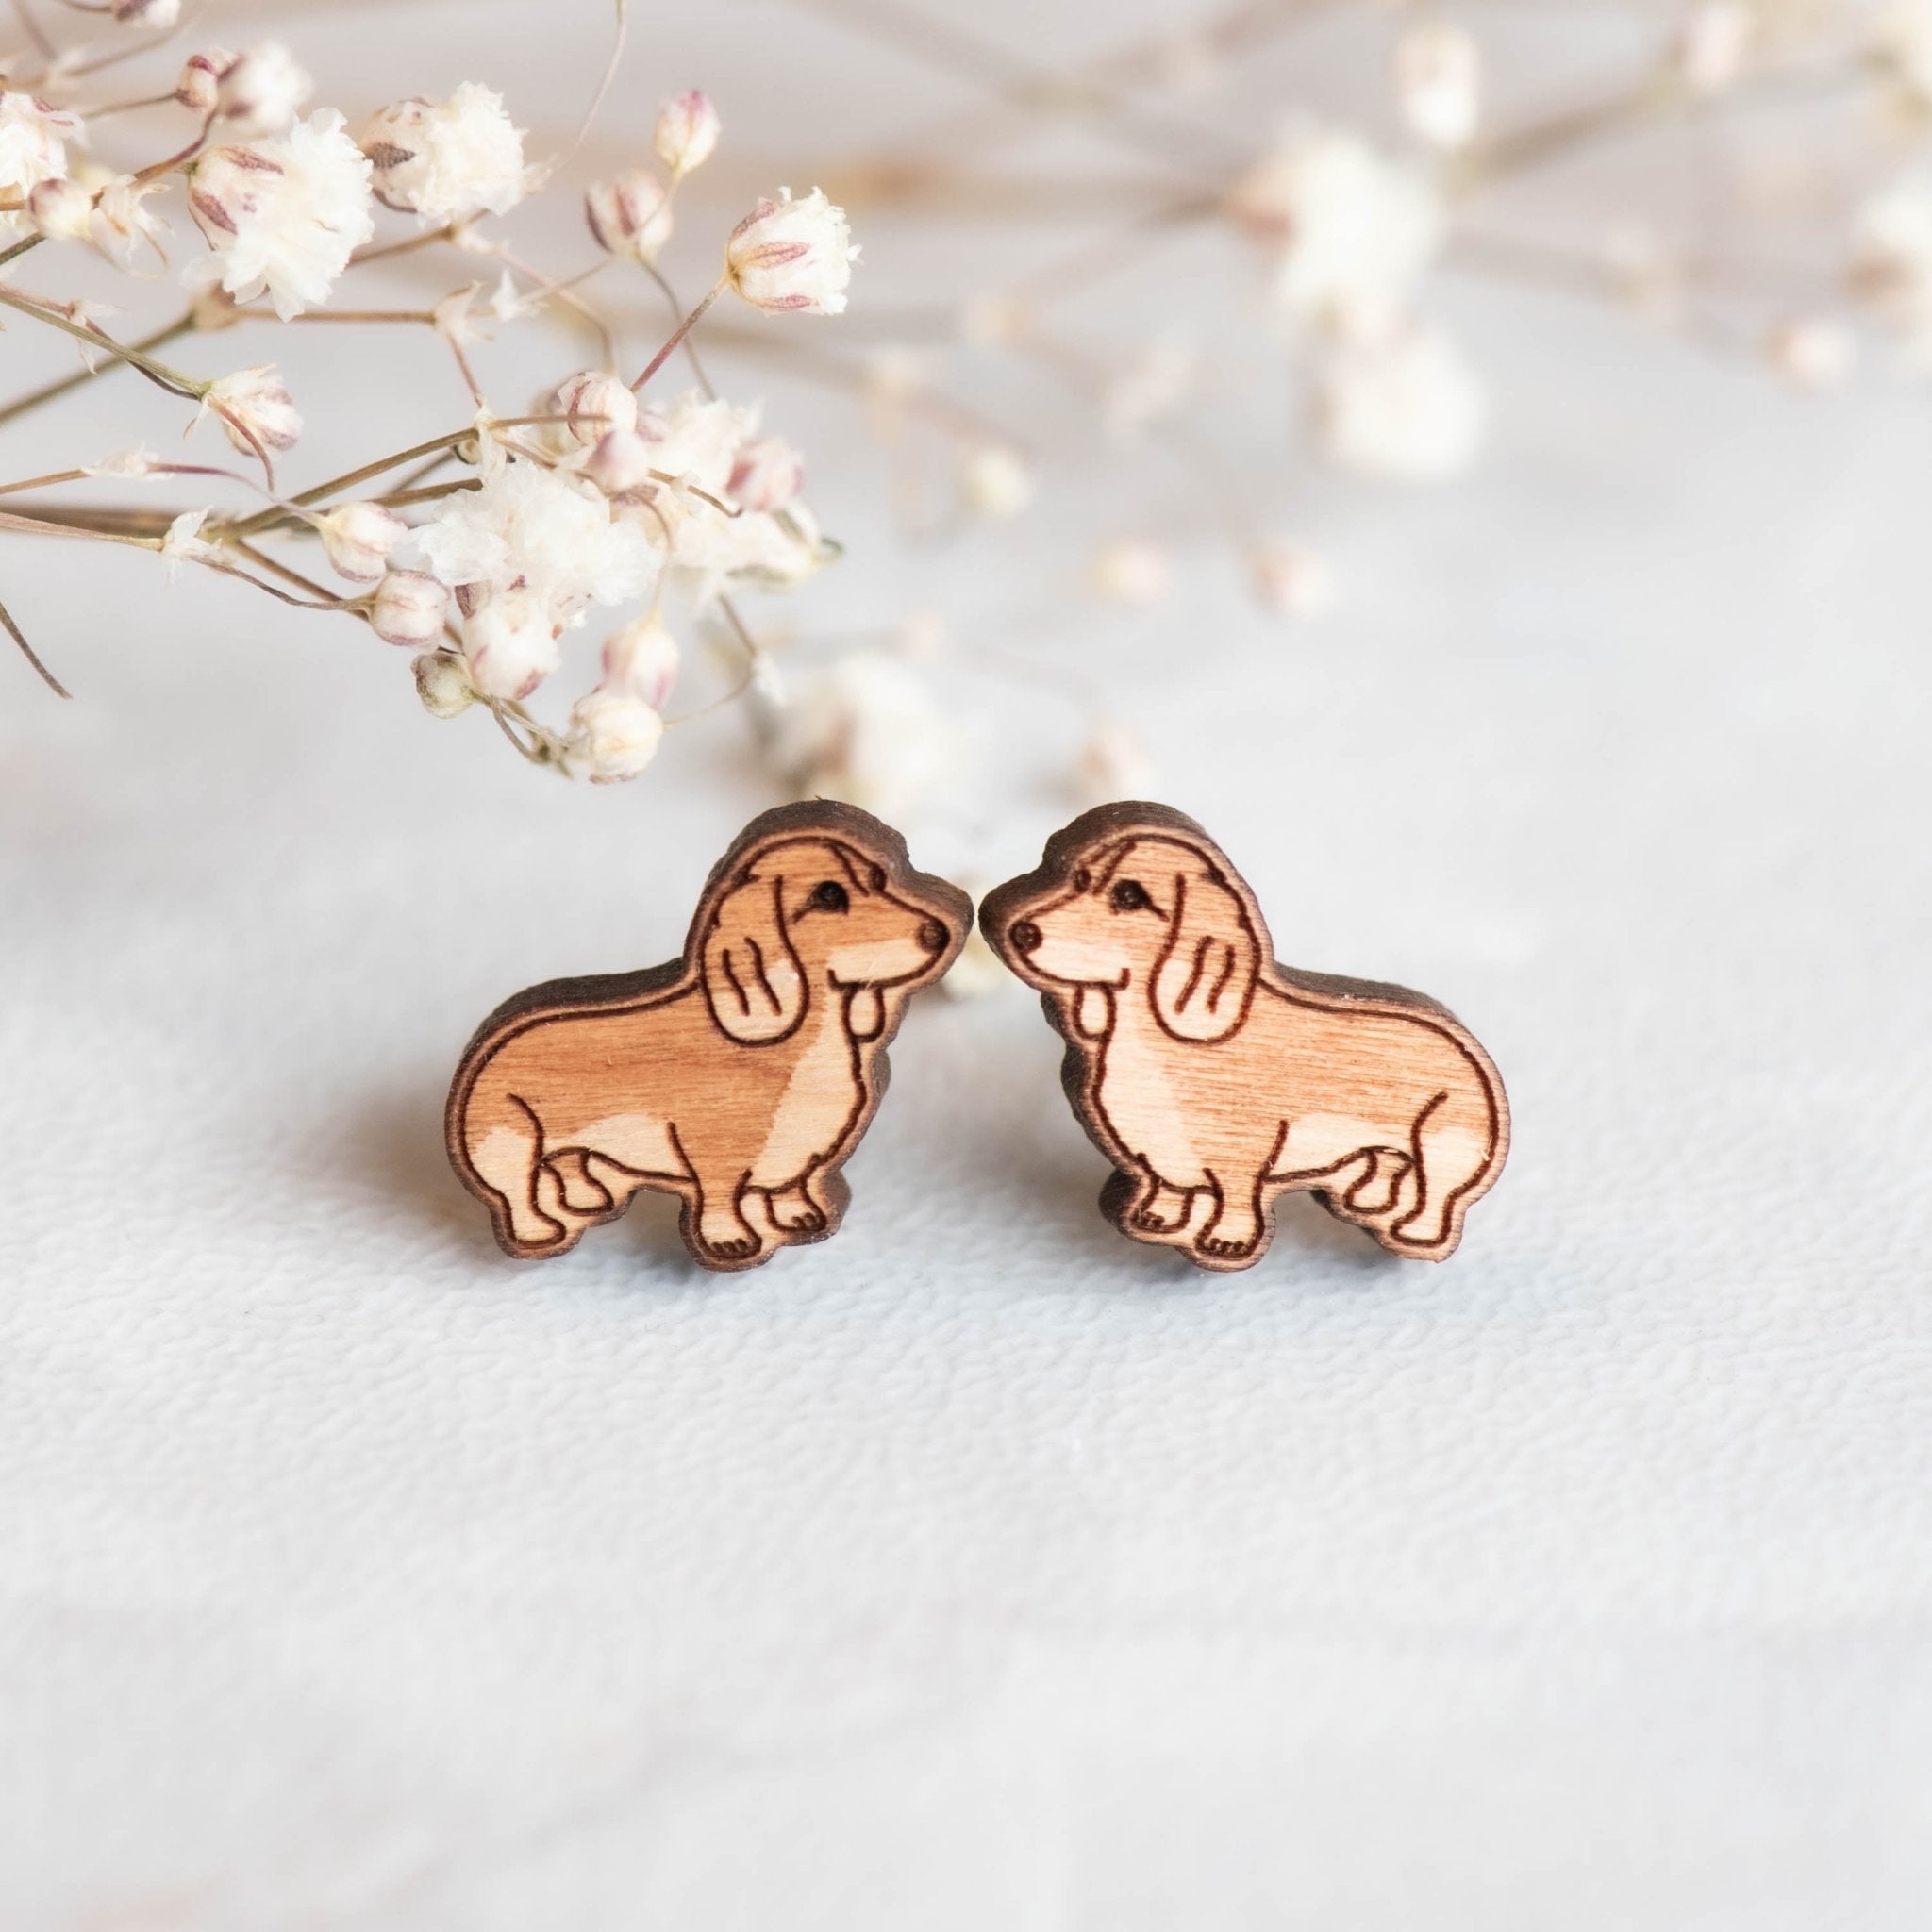 Dachshund Sausage Dog Earrings Wooden Eco-jewellery - EL10189 - Robin Valley Official Store